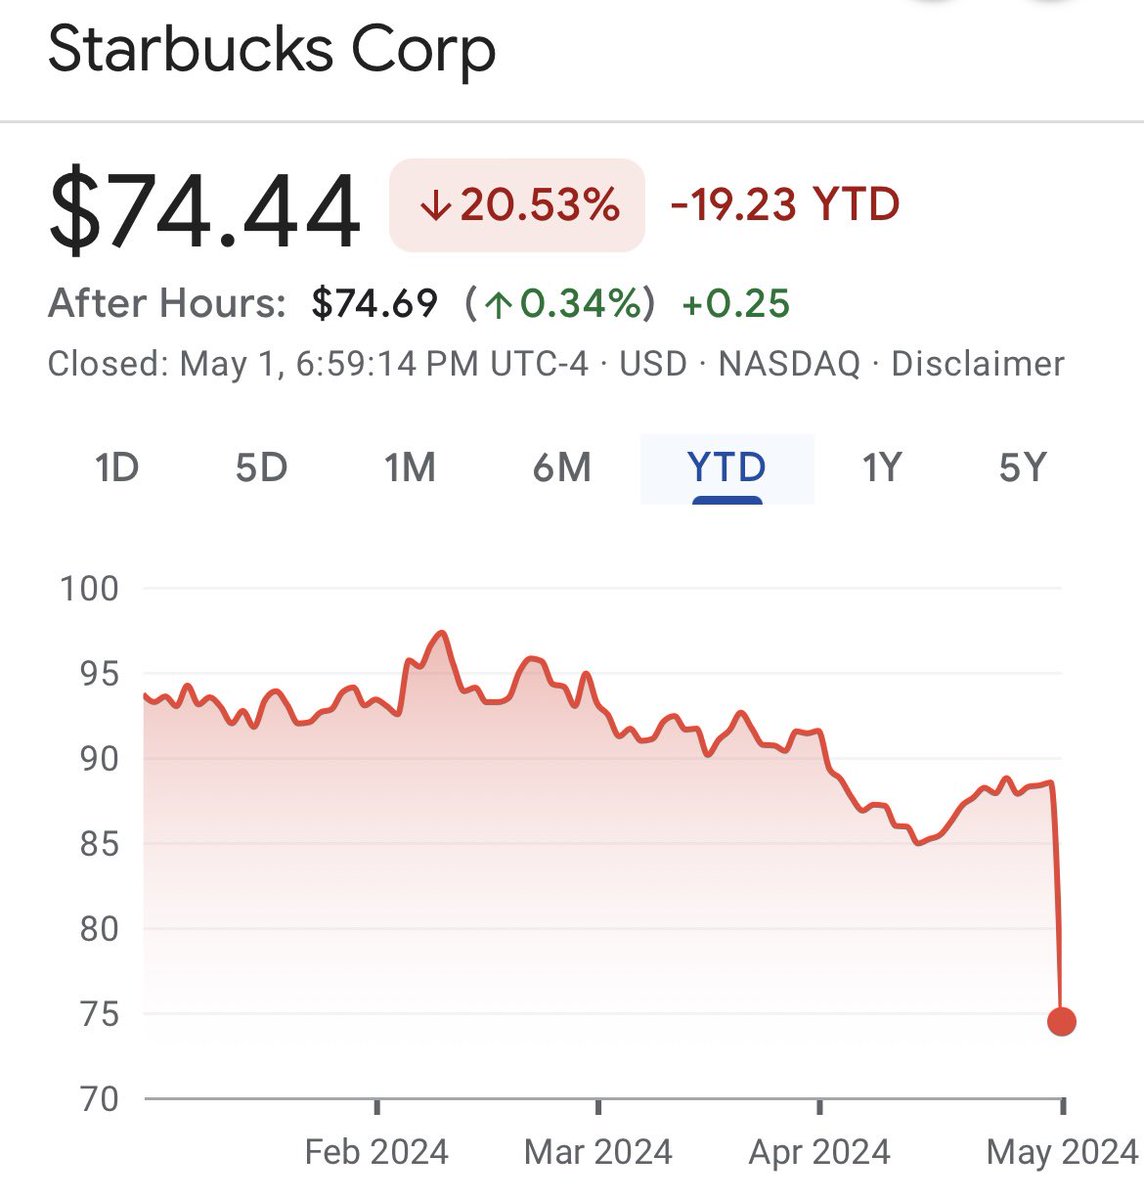 If you loved $SBUX at $100 per share? You’re going to really love it at $74 per share. This is why we just buy & hold $VTI☕️